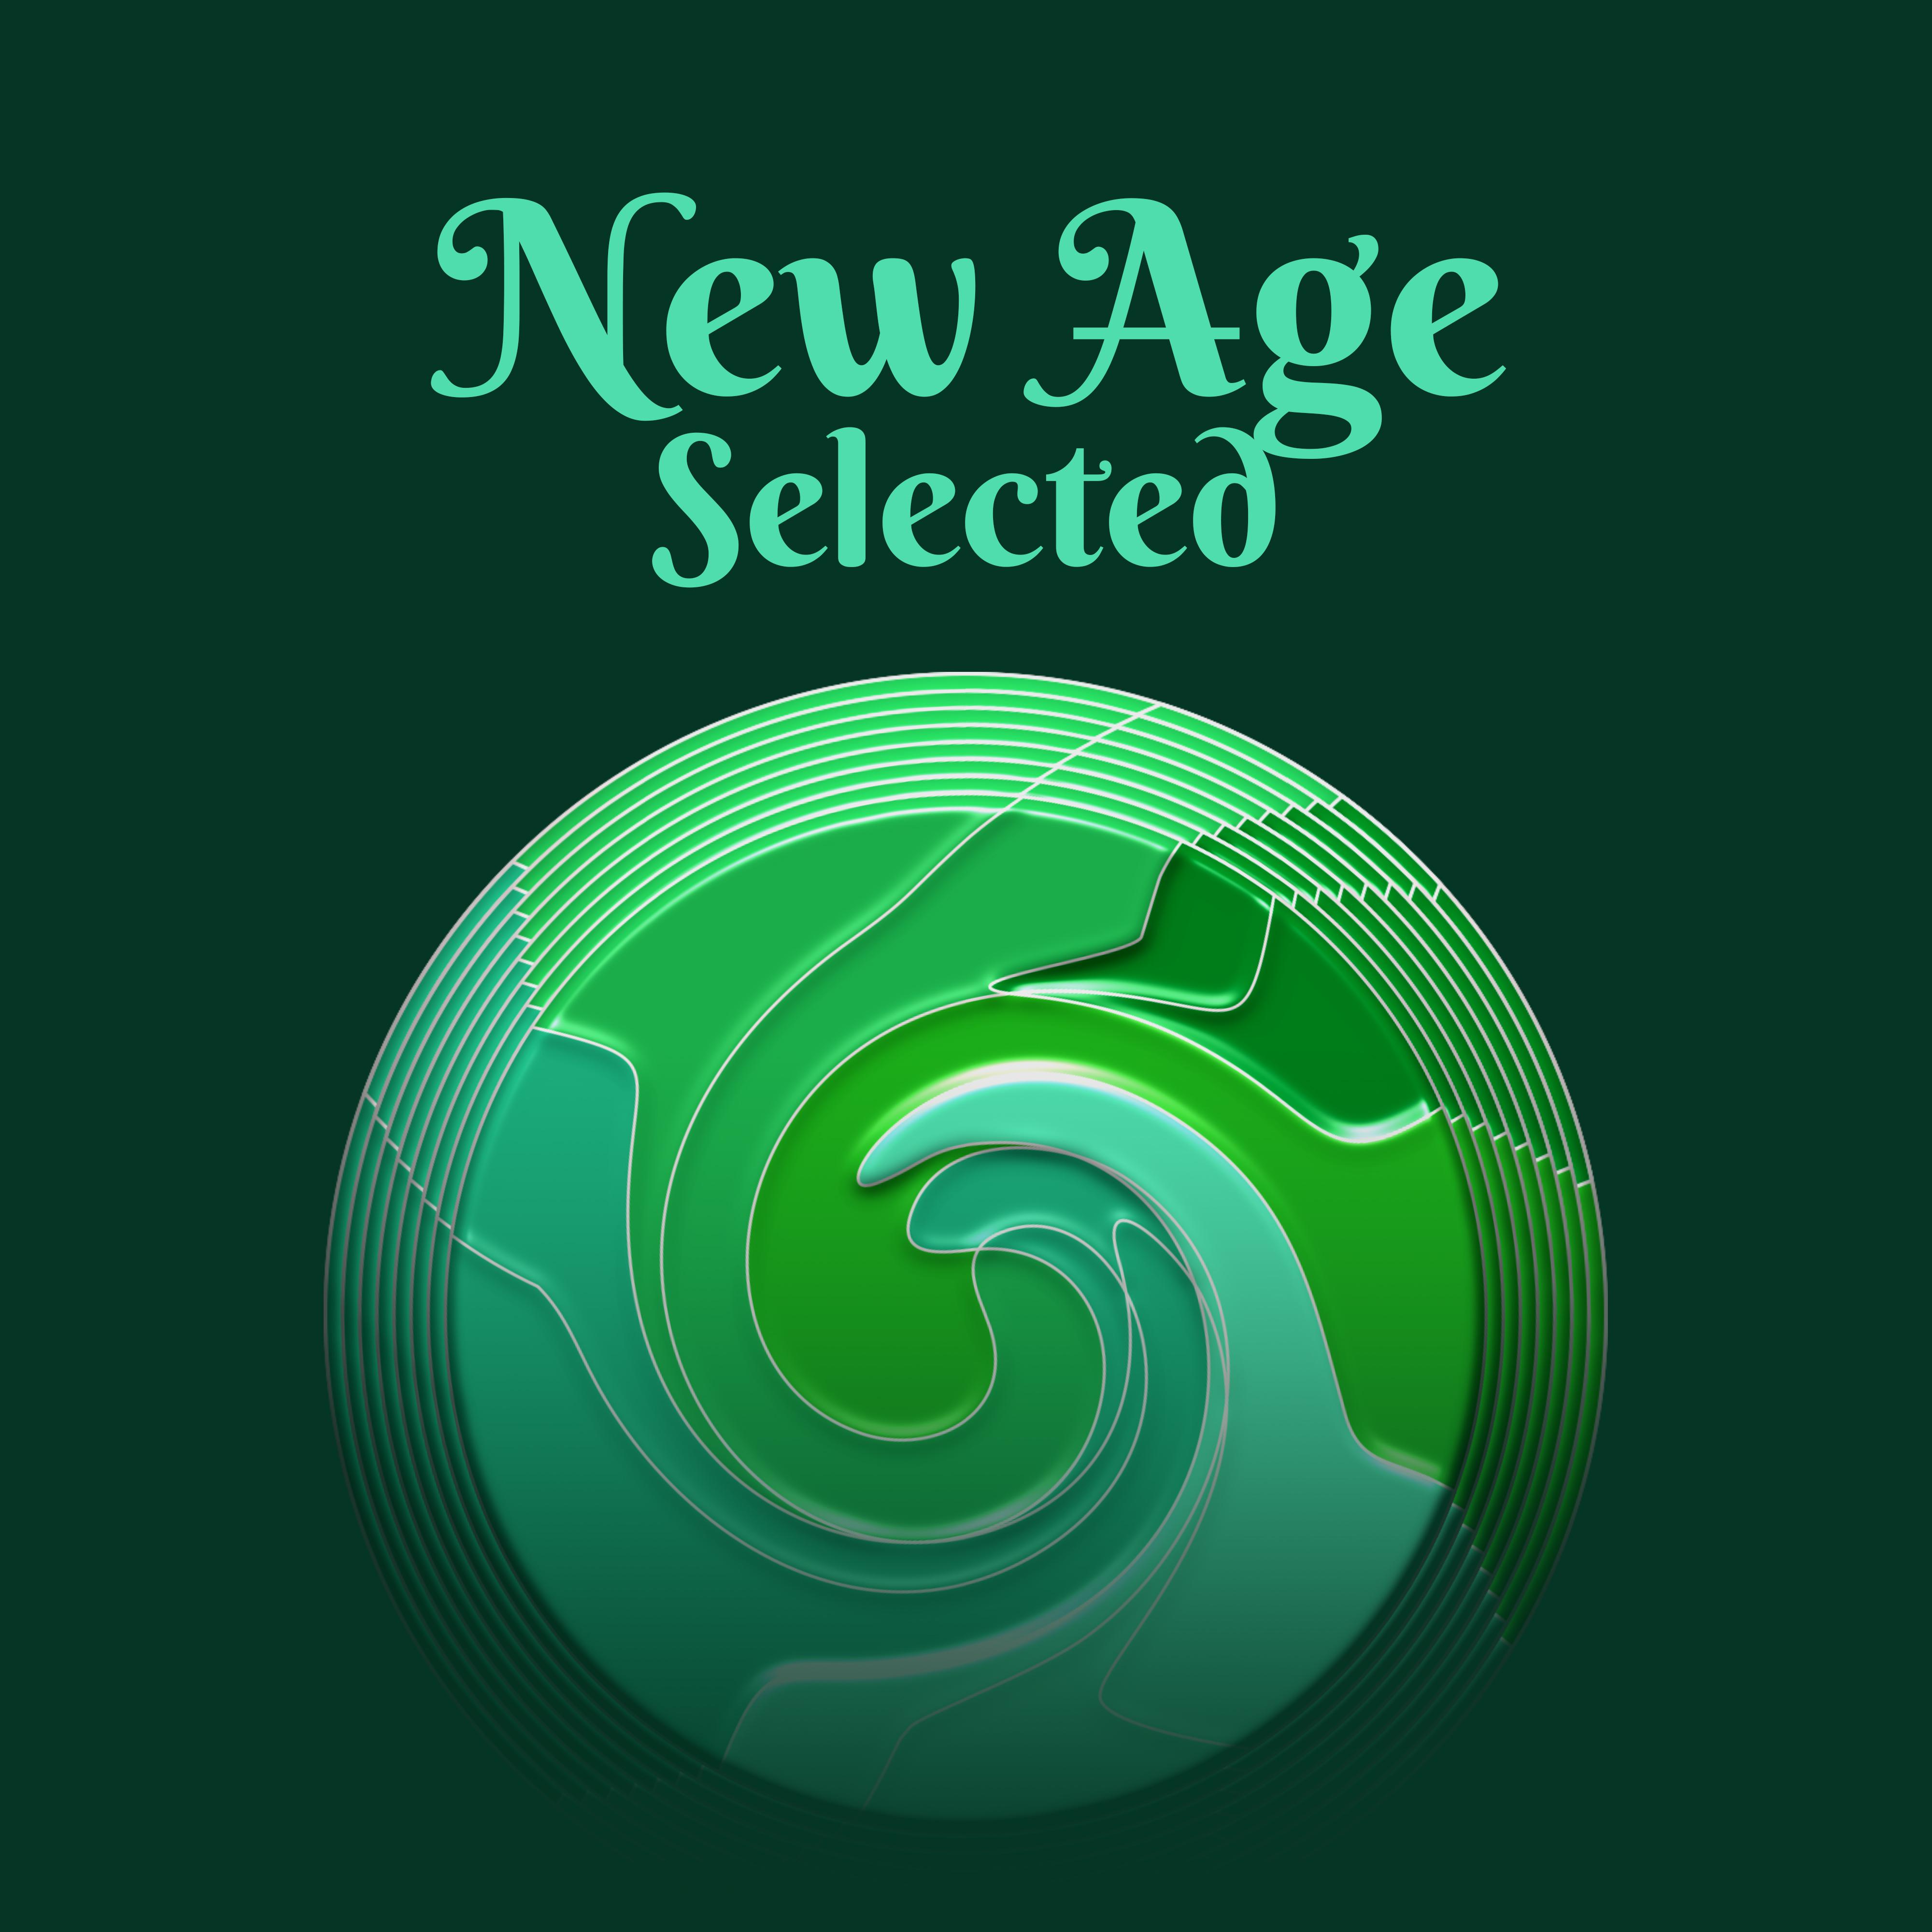 New Age Selected  Calming Nature Sounds, Healing Music Therapy, Pure Relaxation, Zen, Stress Relief, Rest